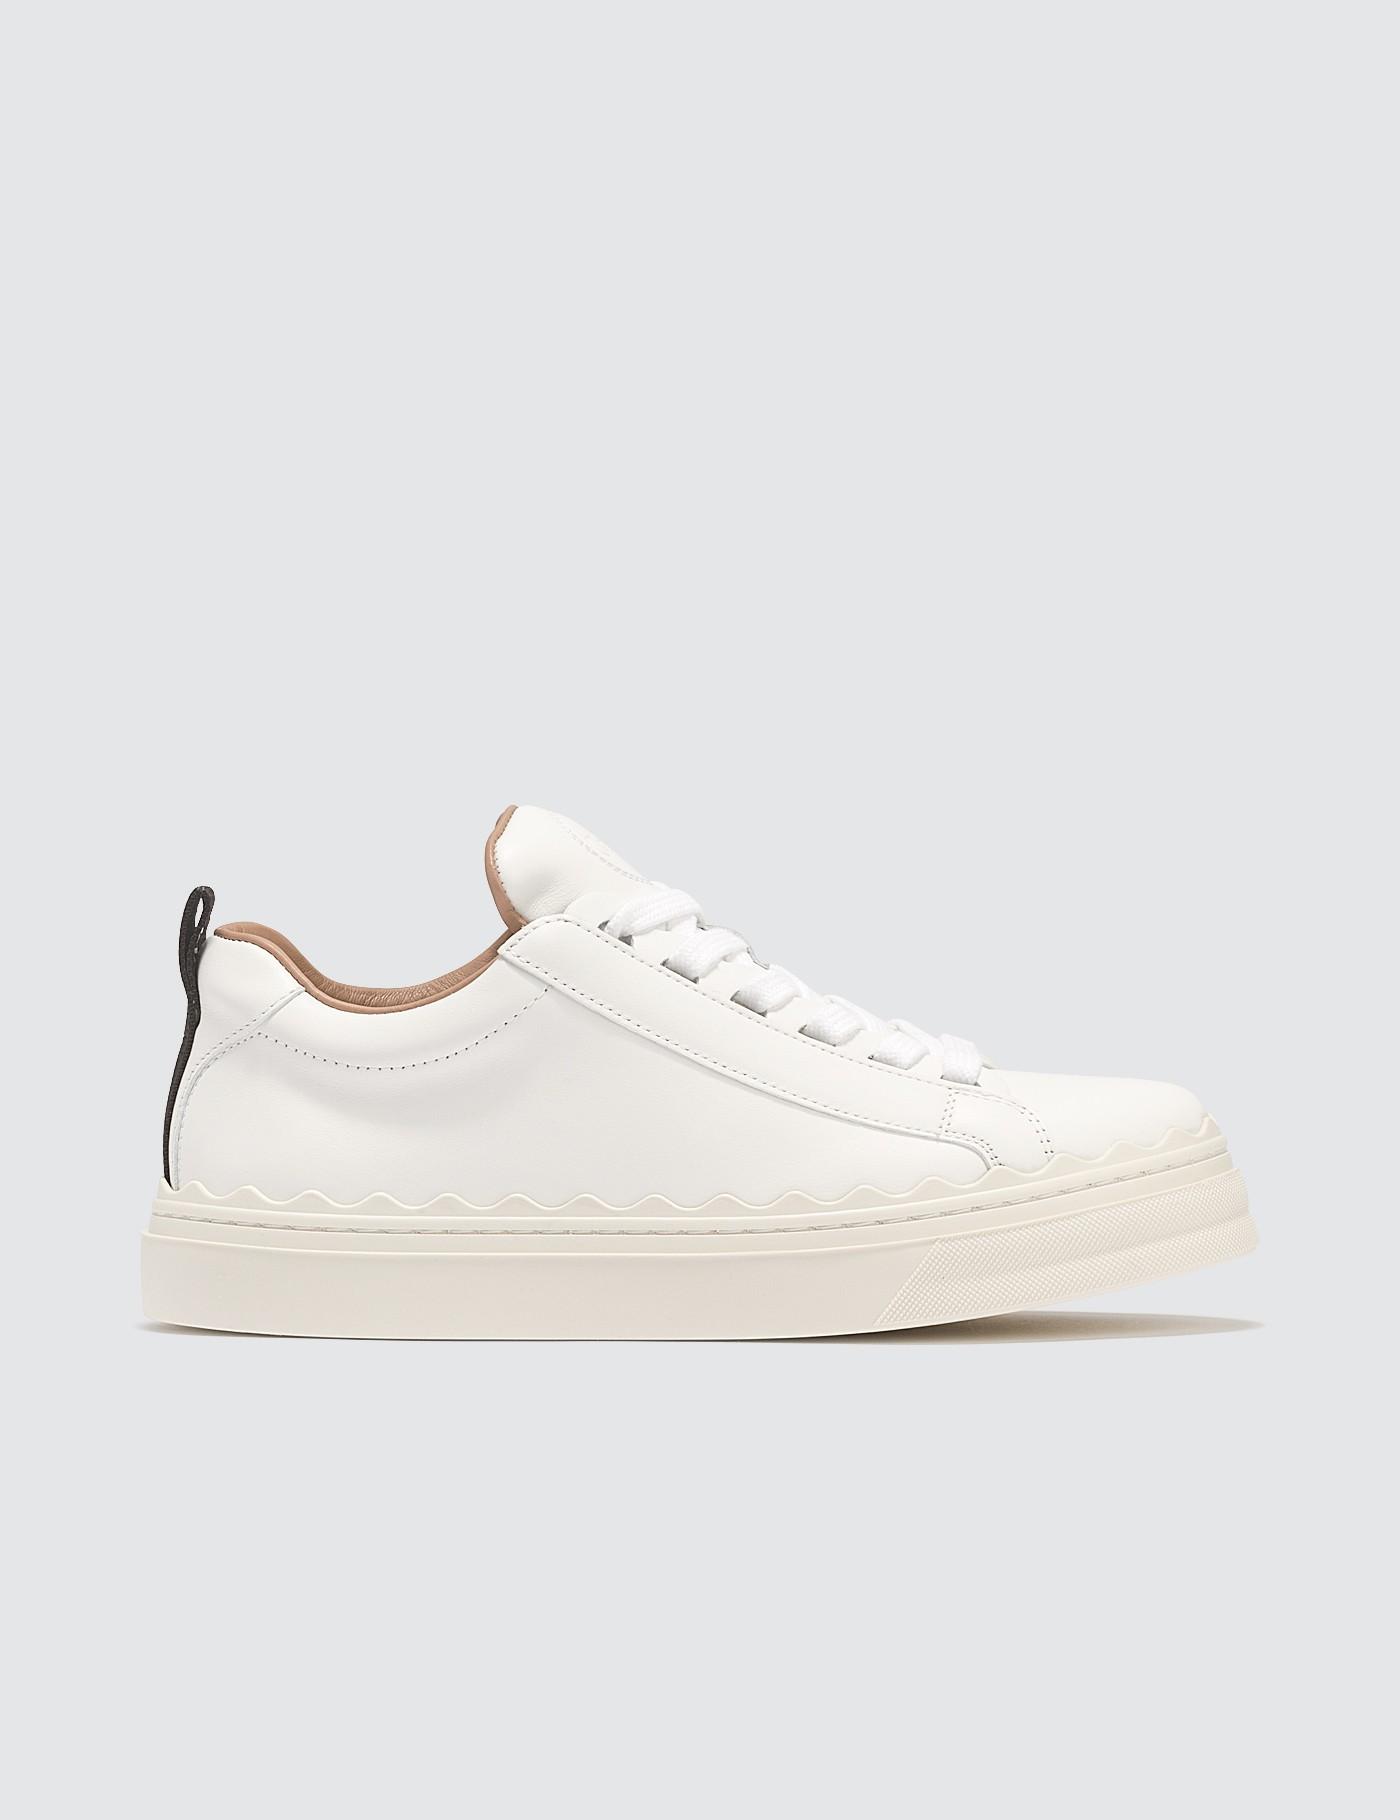 Chloé Leather Lauren Sneaker in White - Save 8% - Lyst